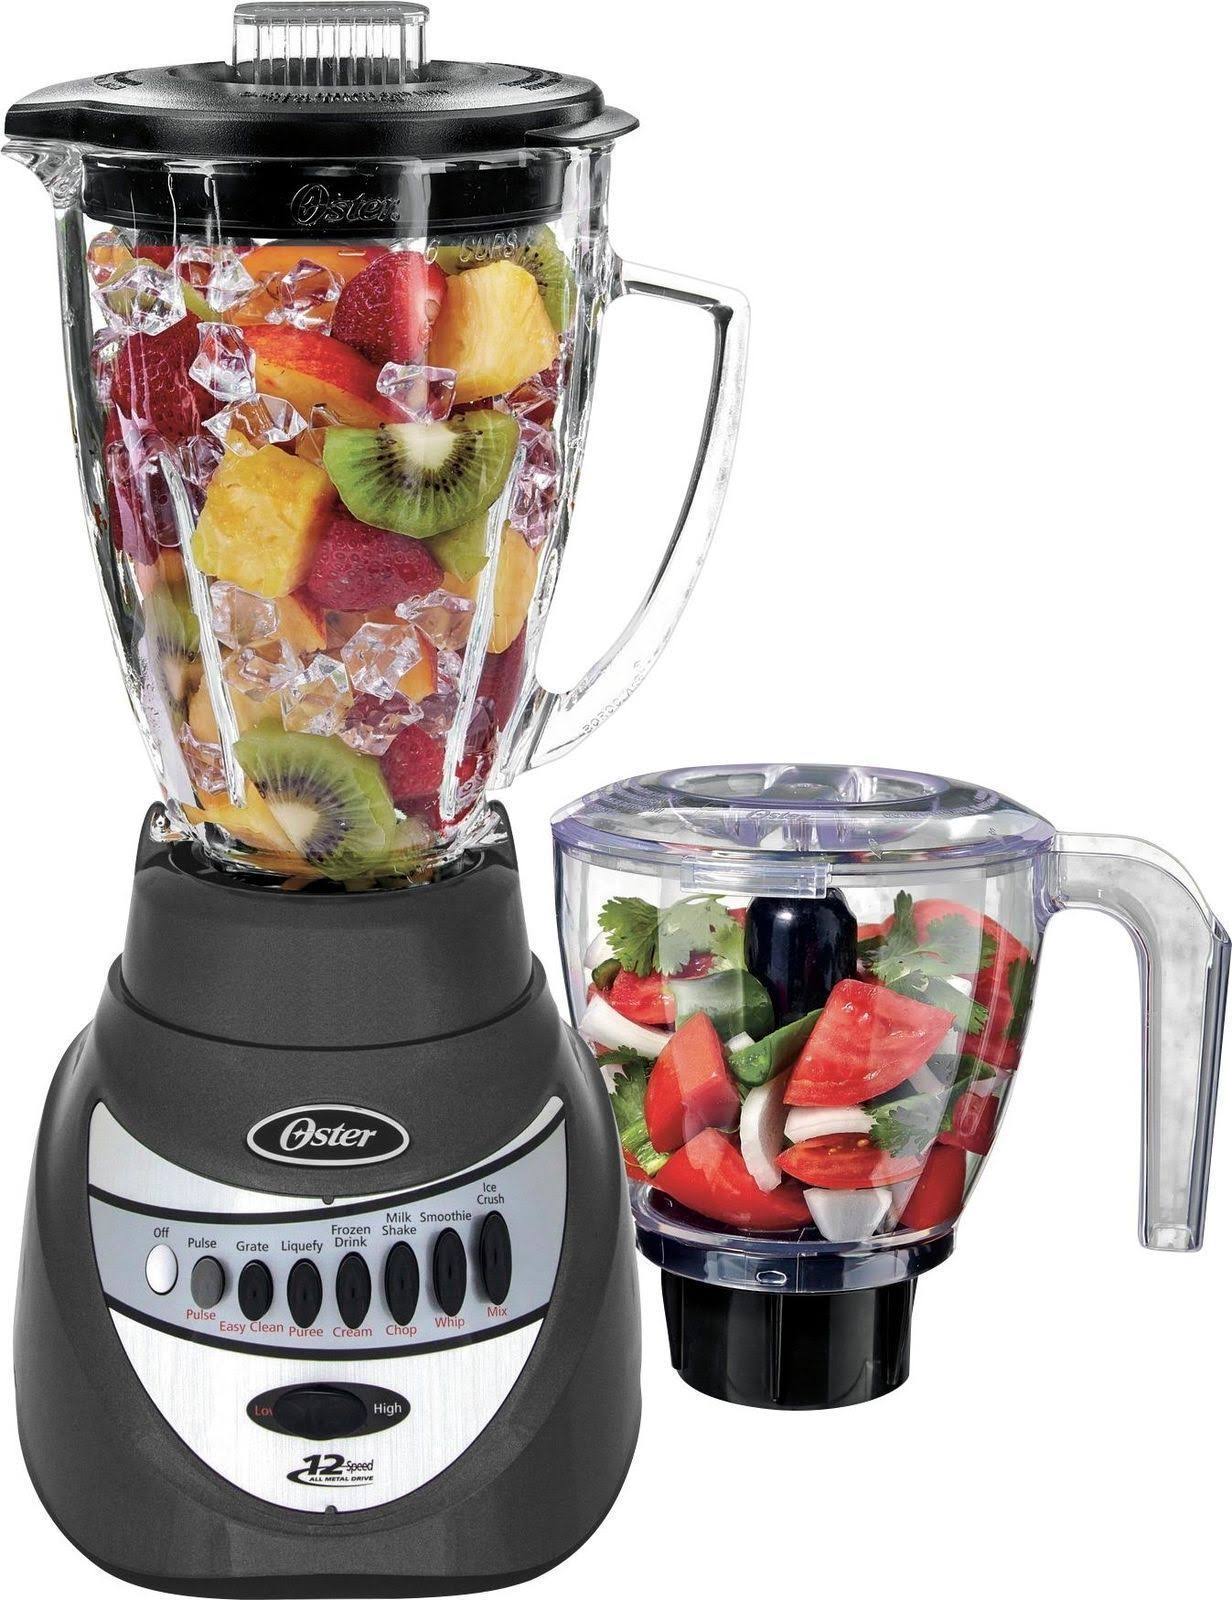 Oster Blender Plus Food Chopper - Gray and Black, 700W